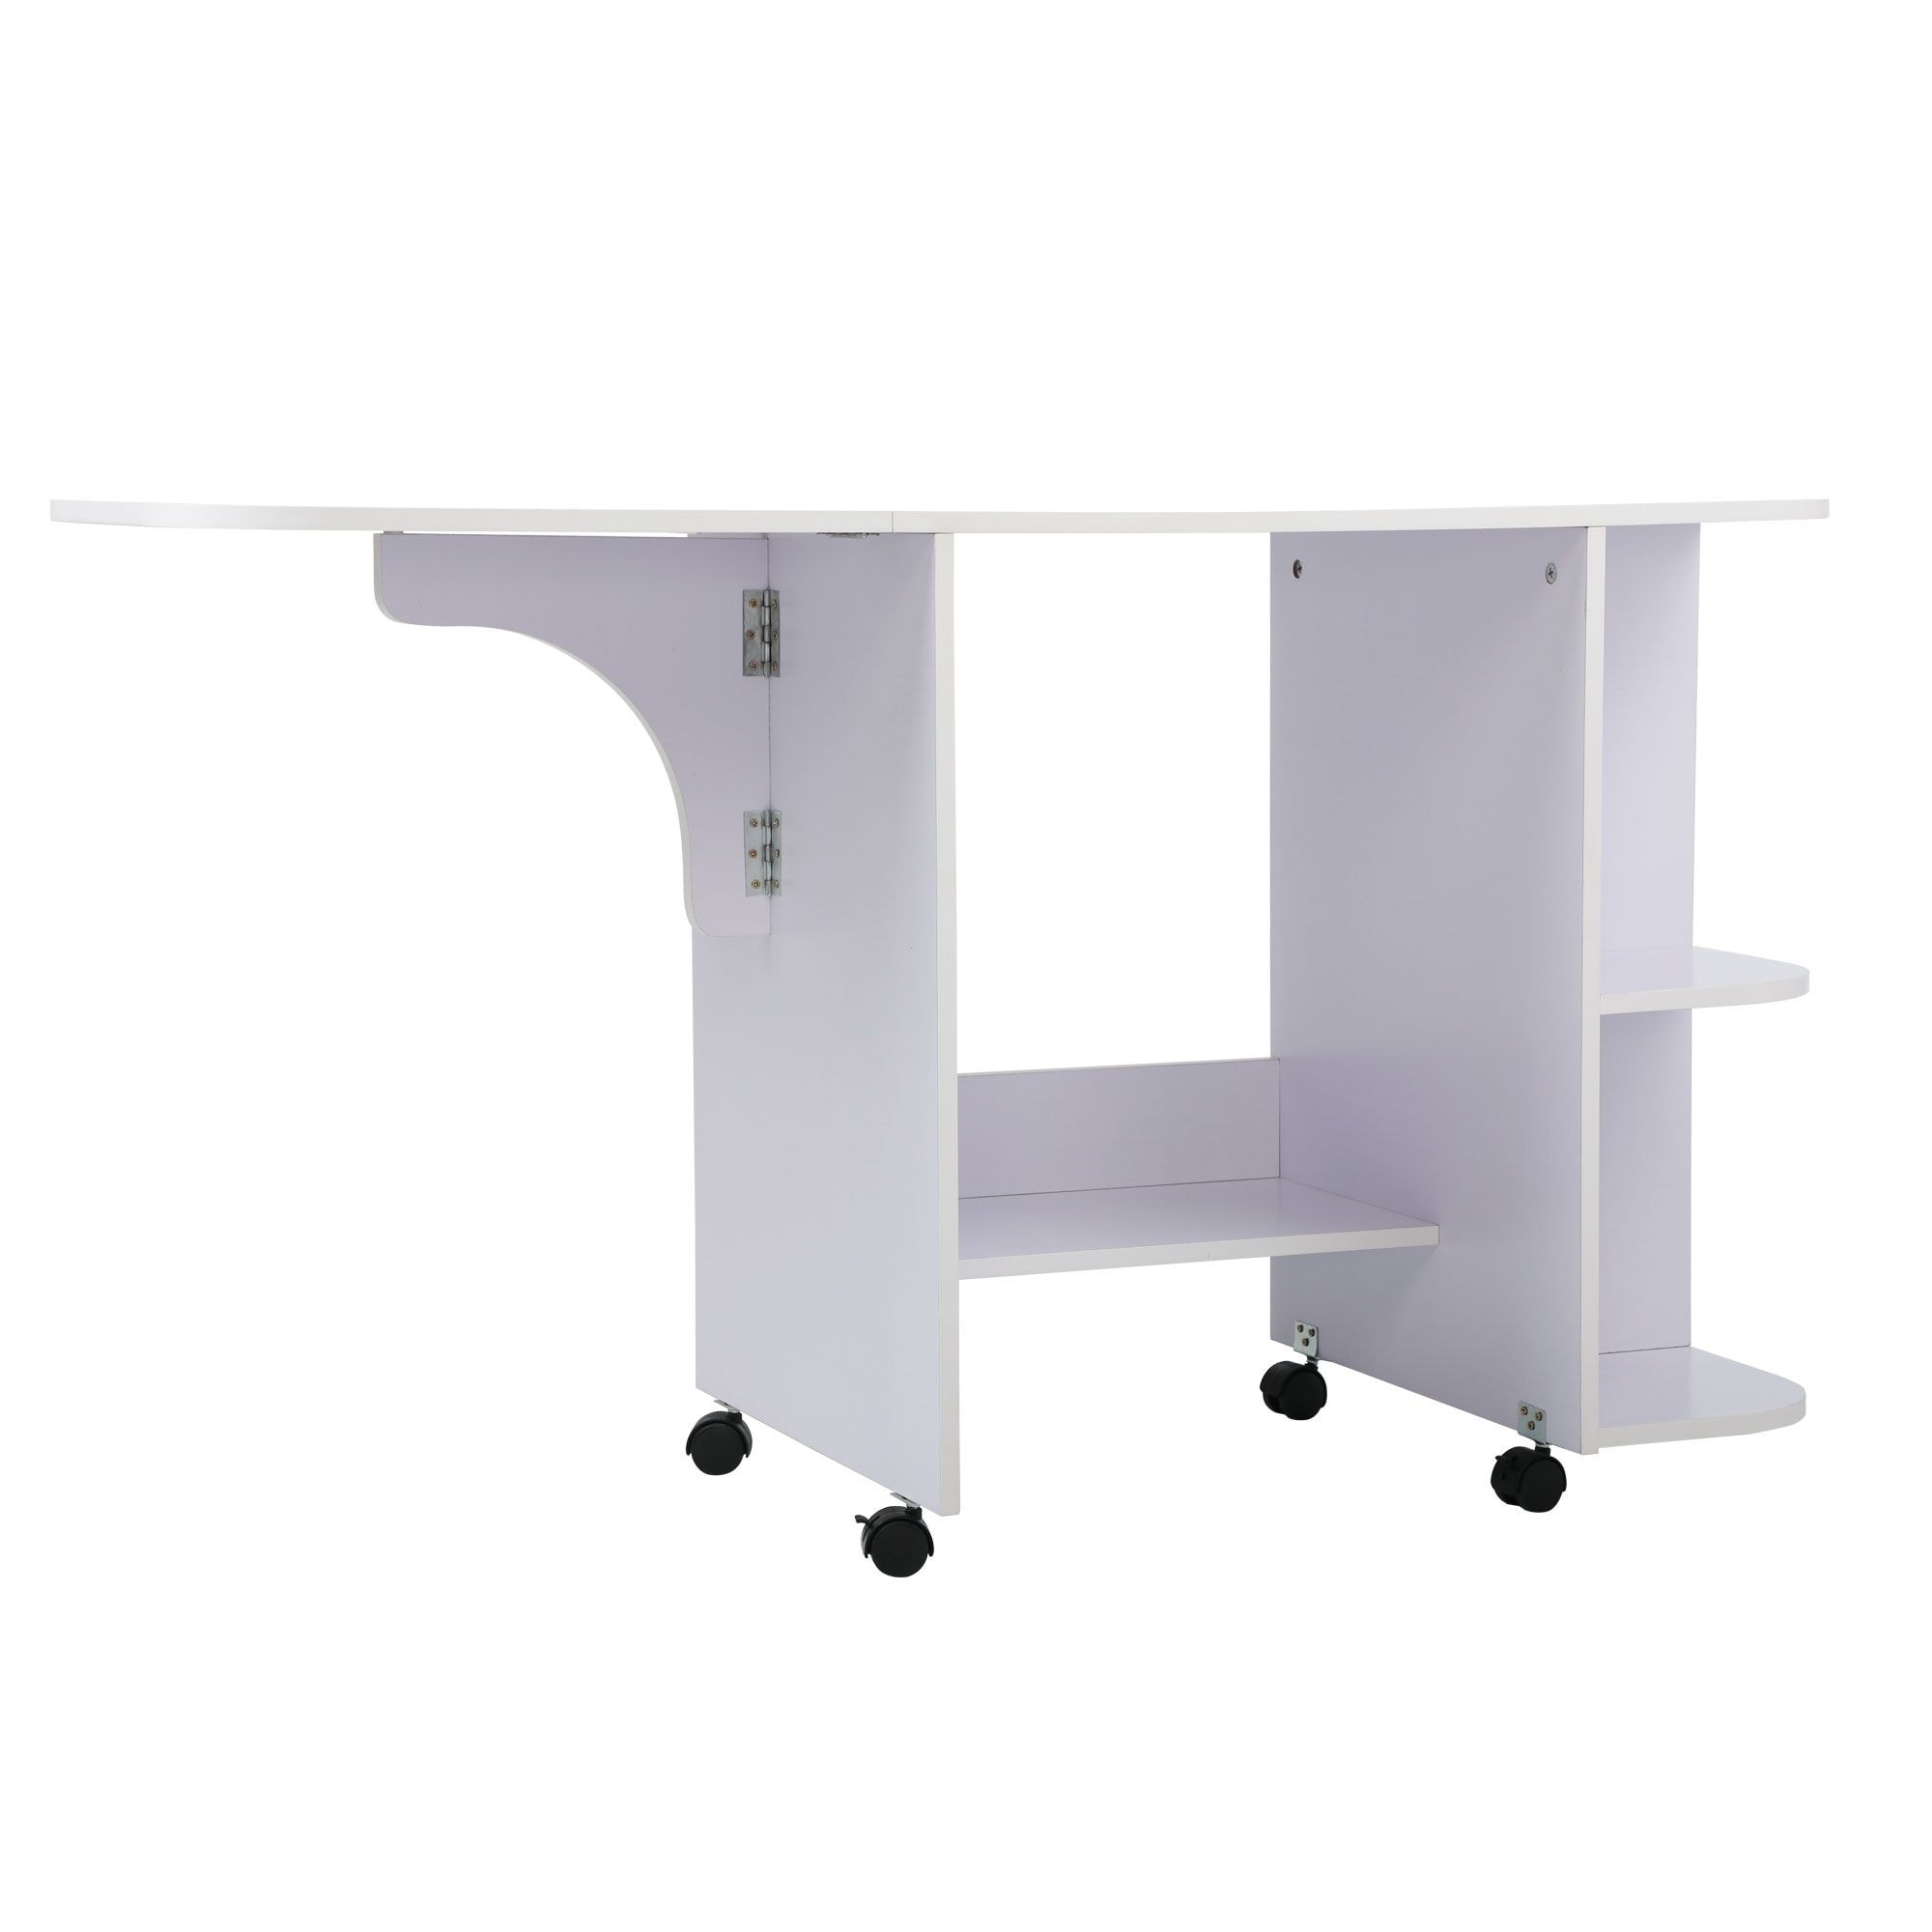 Offex Hobby Craft Center Multipurpose Foldable Sewing Desk Table - Bed Bath  & Beyond - 13446504